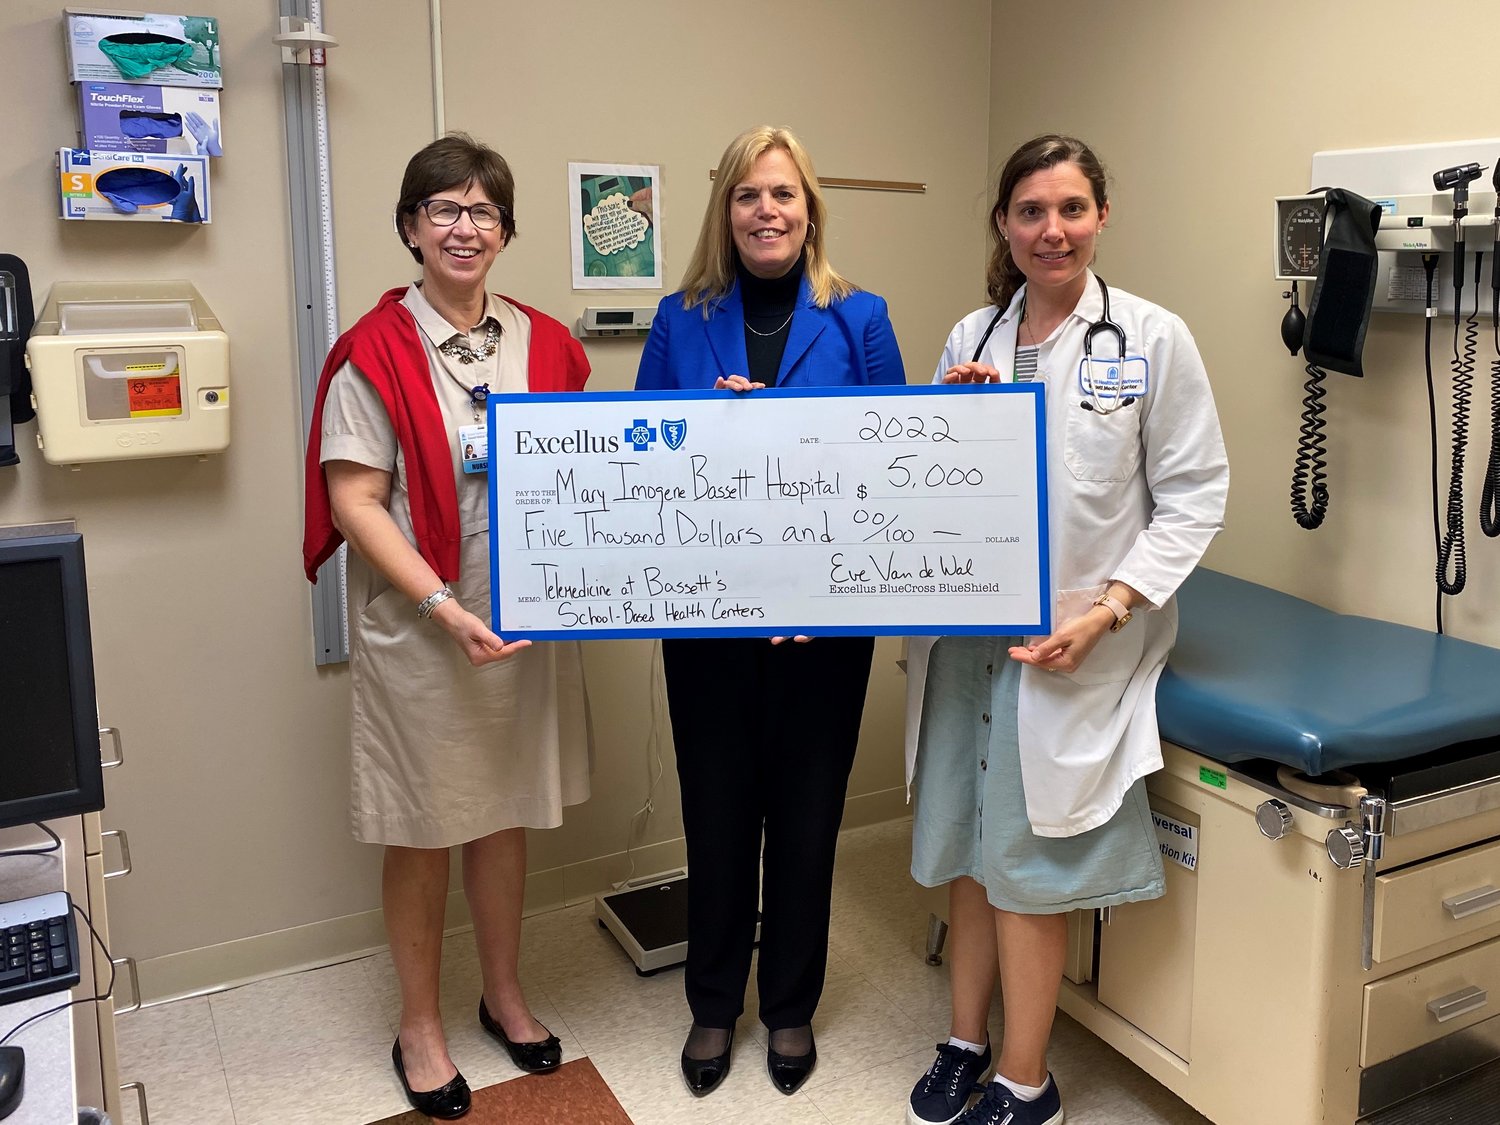 Jane Hamilton RN, practice manager, left, and Courtney Graham, FNP, right, accept a $5,000 grant on behalf of Bassett’s School-Based Health Center from Eve Van de Wal, Excellus BlueCross BlueShield Utica regional president. The funding will help the center expand its popular telehealth services.